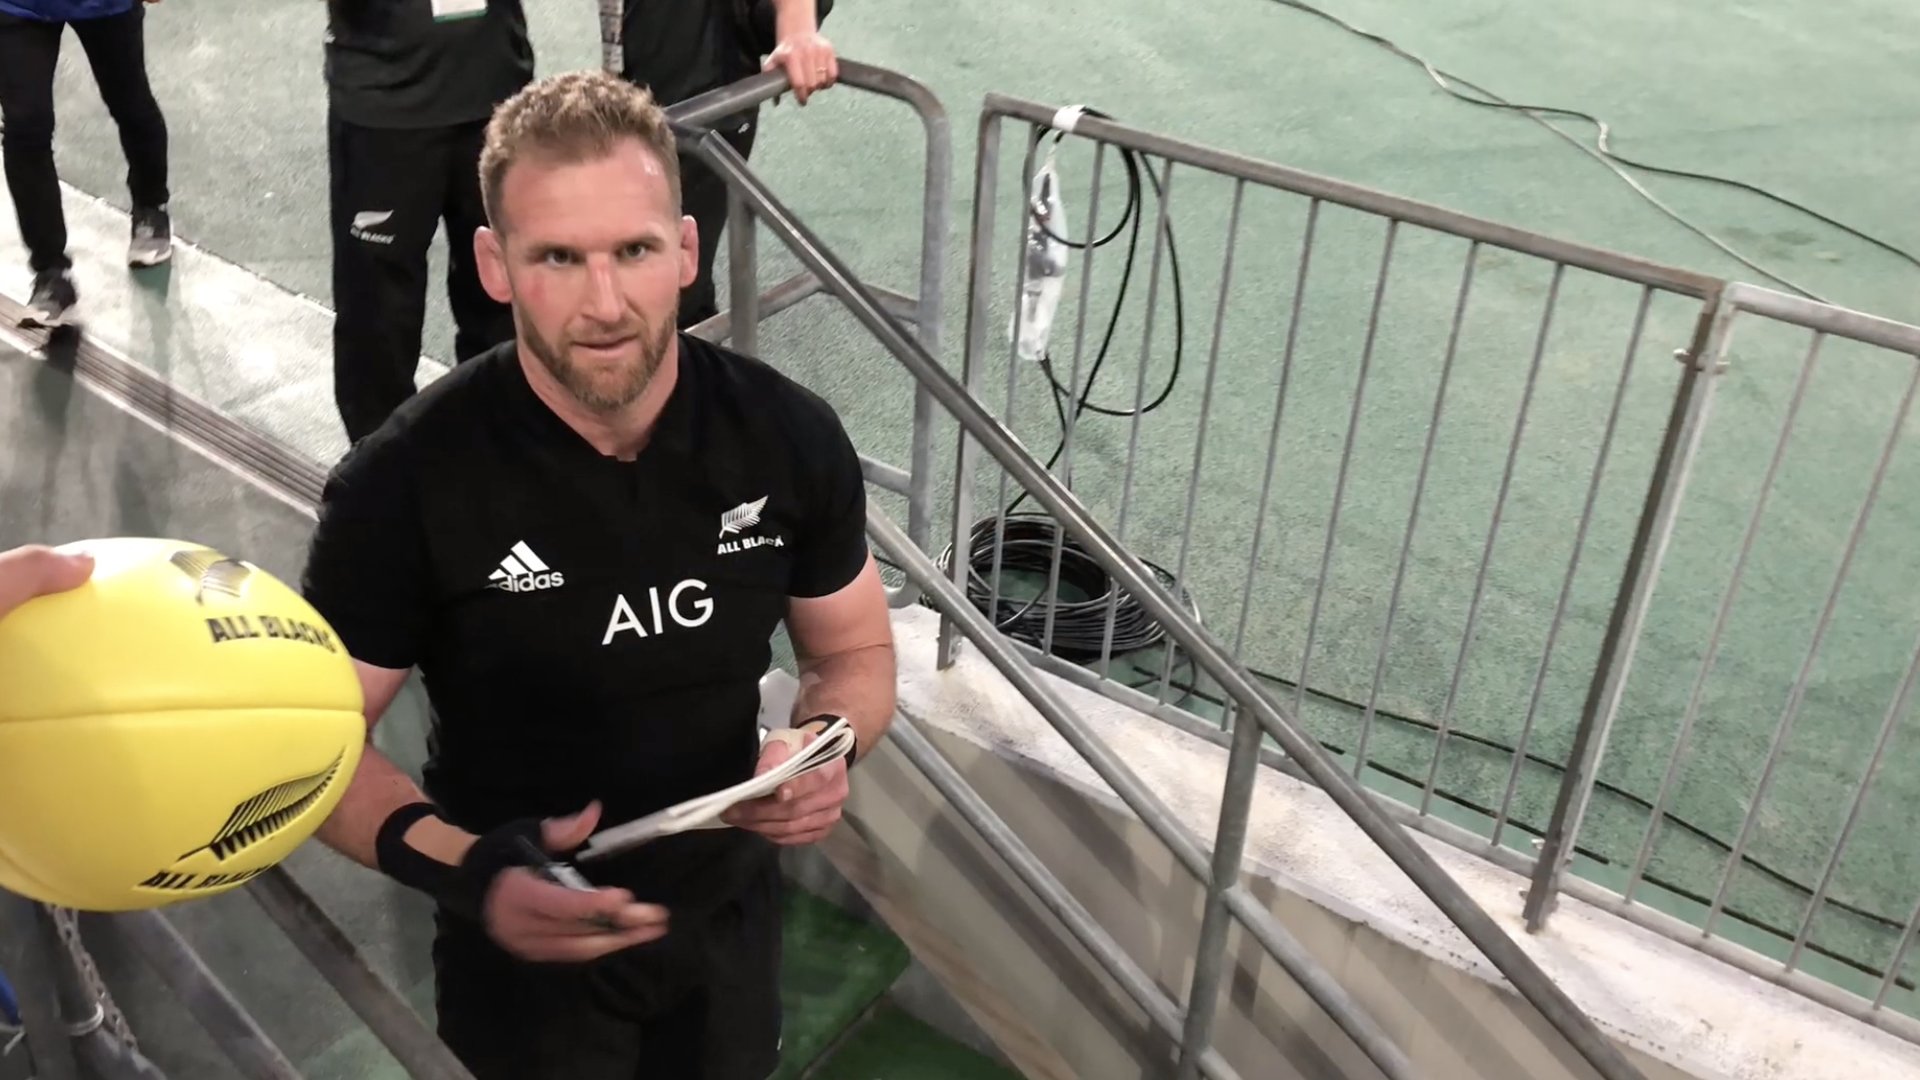 FOOTAGE: All Black players are remarkably composed as Japanese fans throw items at them